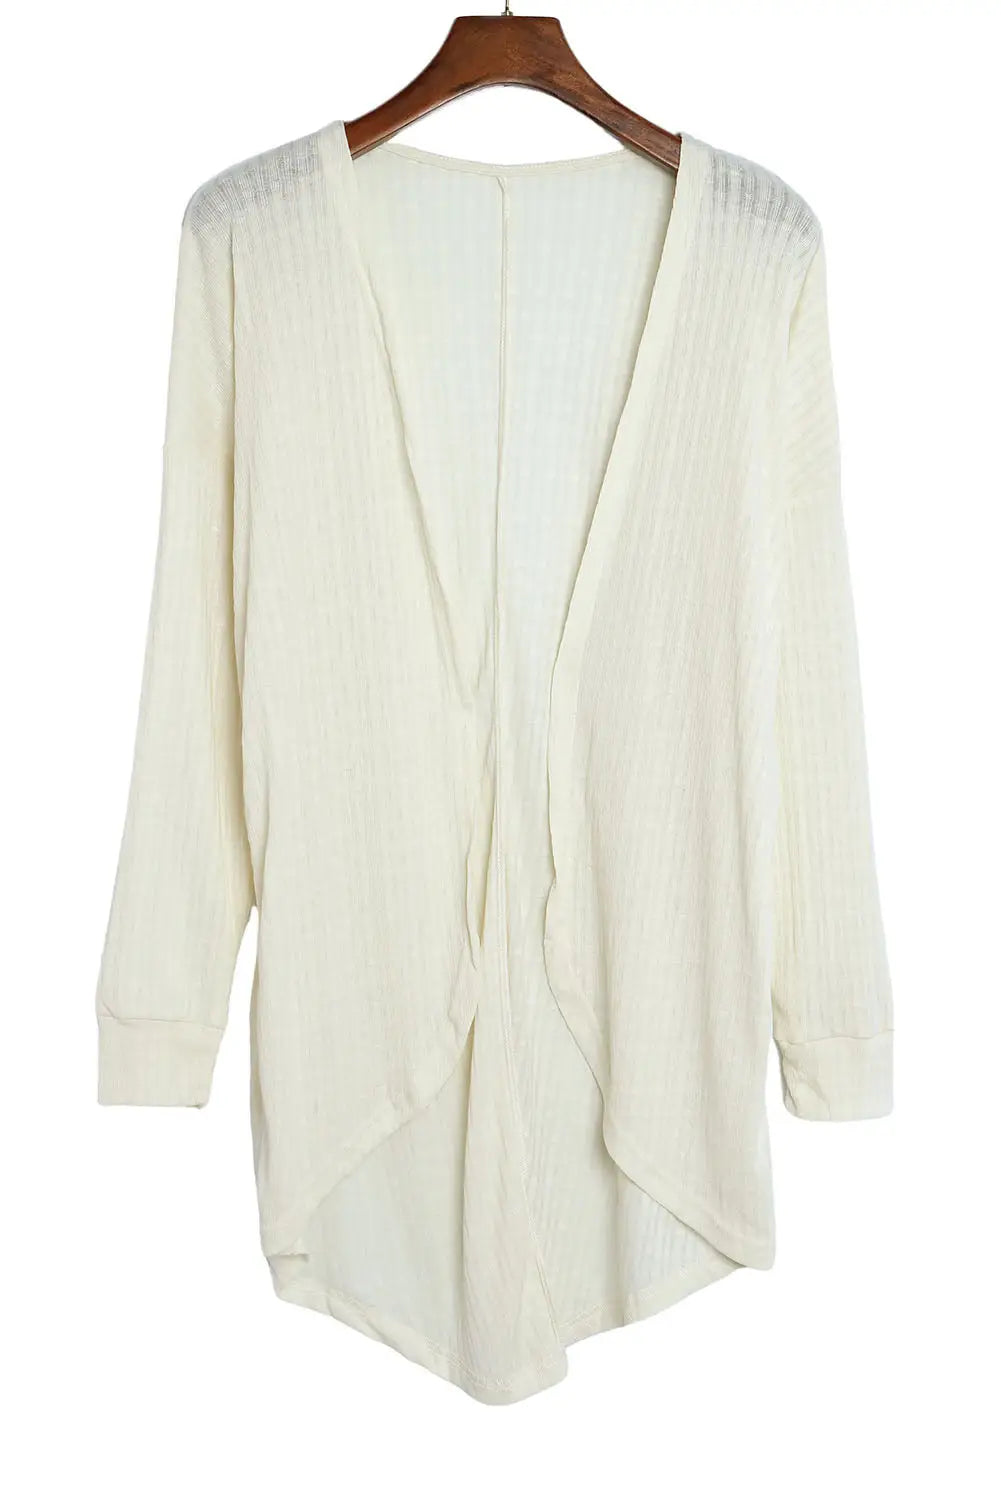 Beige open front rounded hem textured knit cardigan - sweaters & cardigans